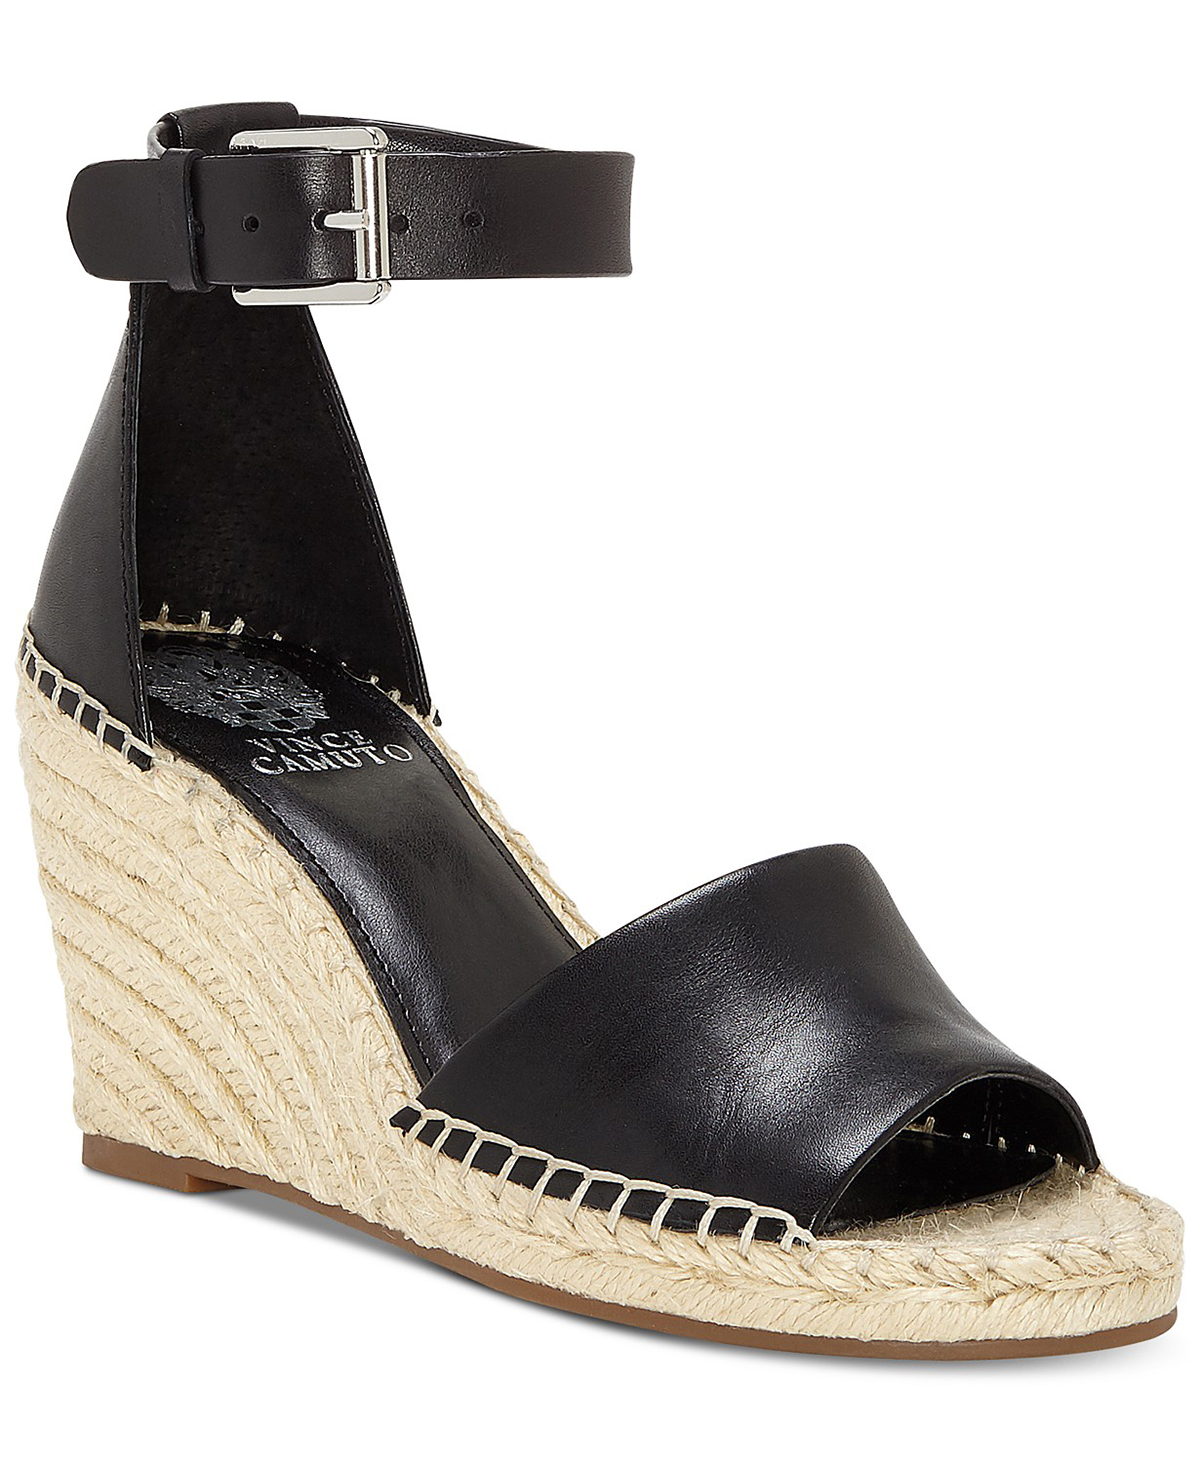 It's the Last Day to Save on These Stylish Summer Sandals at Macy's